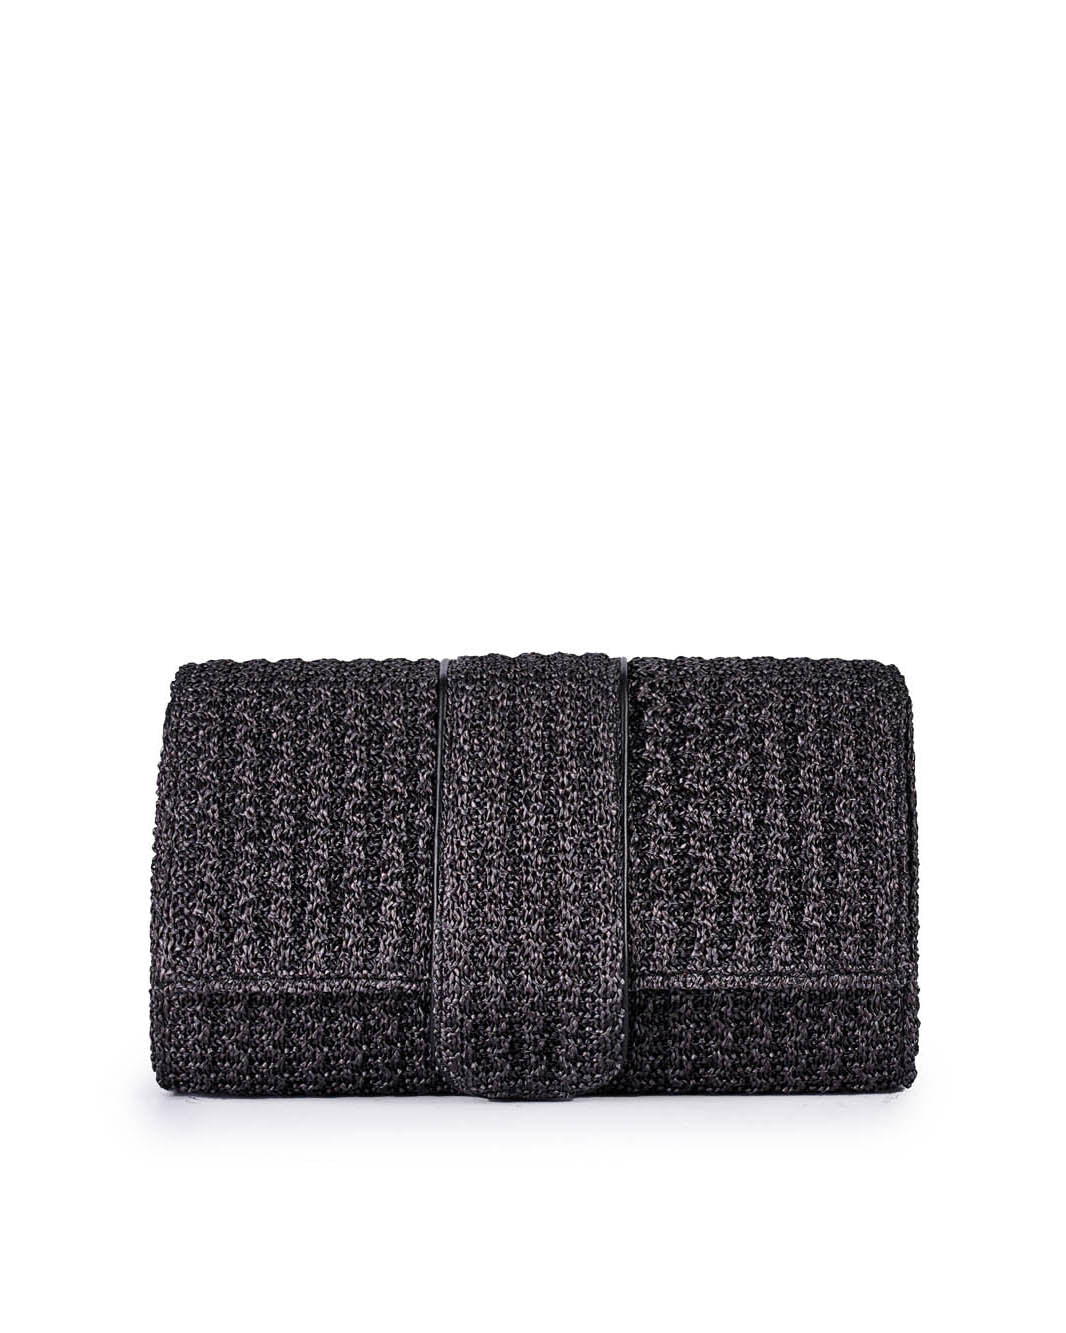 Black woven clutch bag on a white background